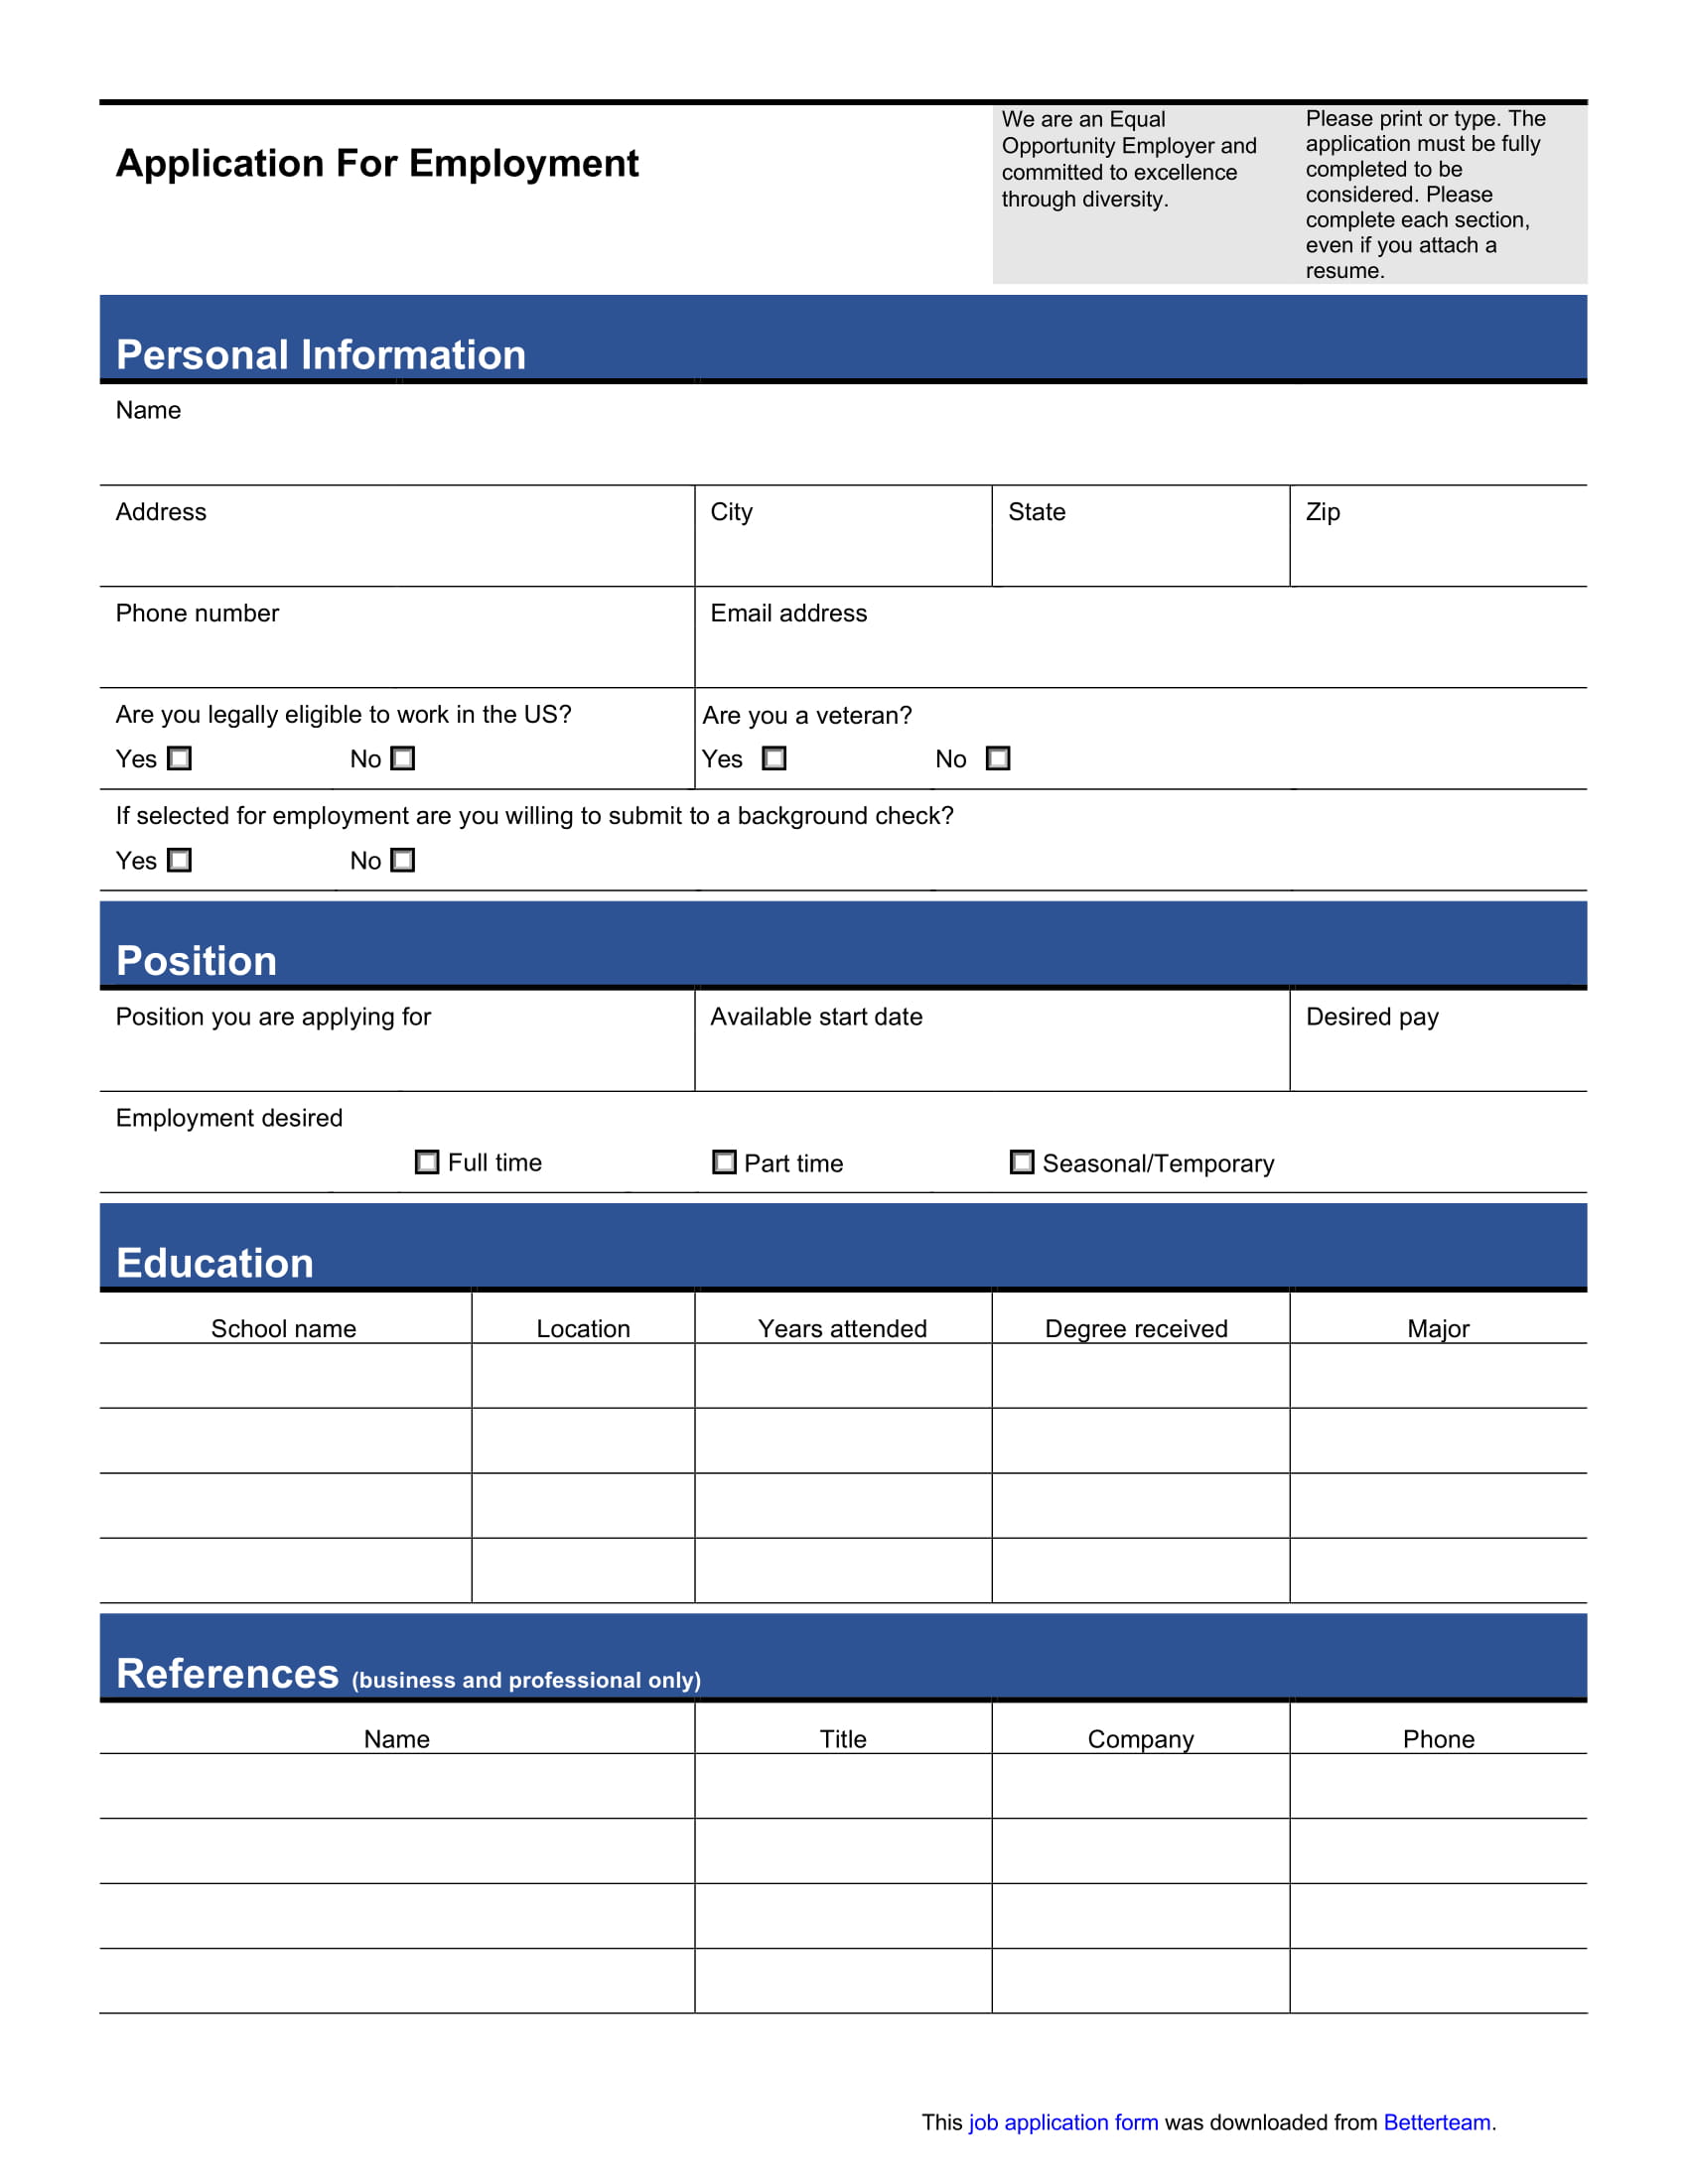 application for employment form example